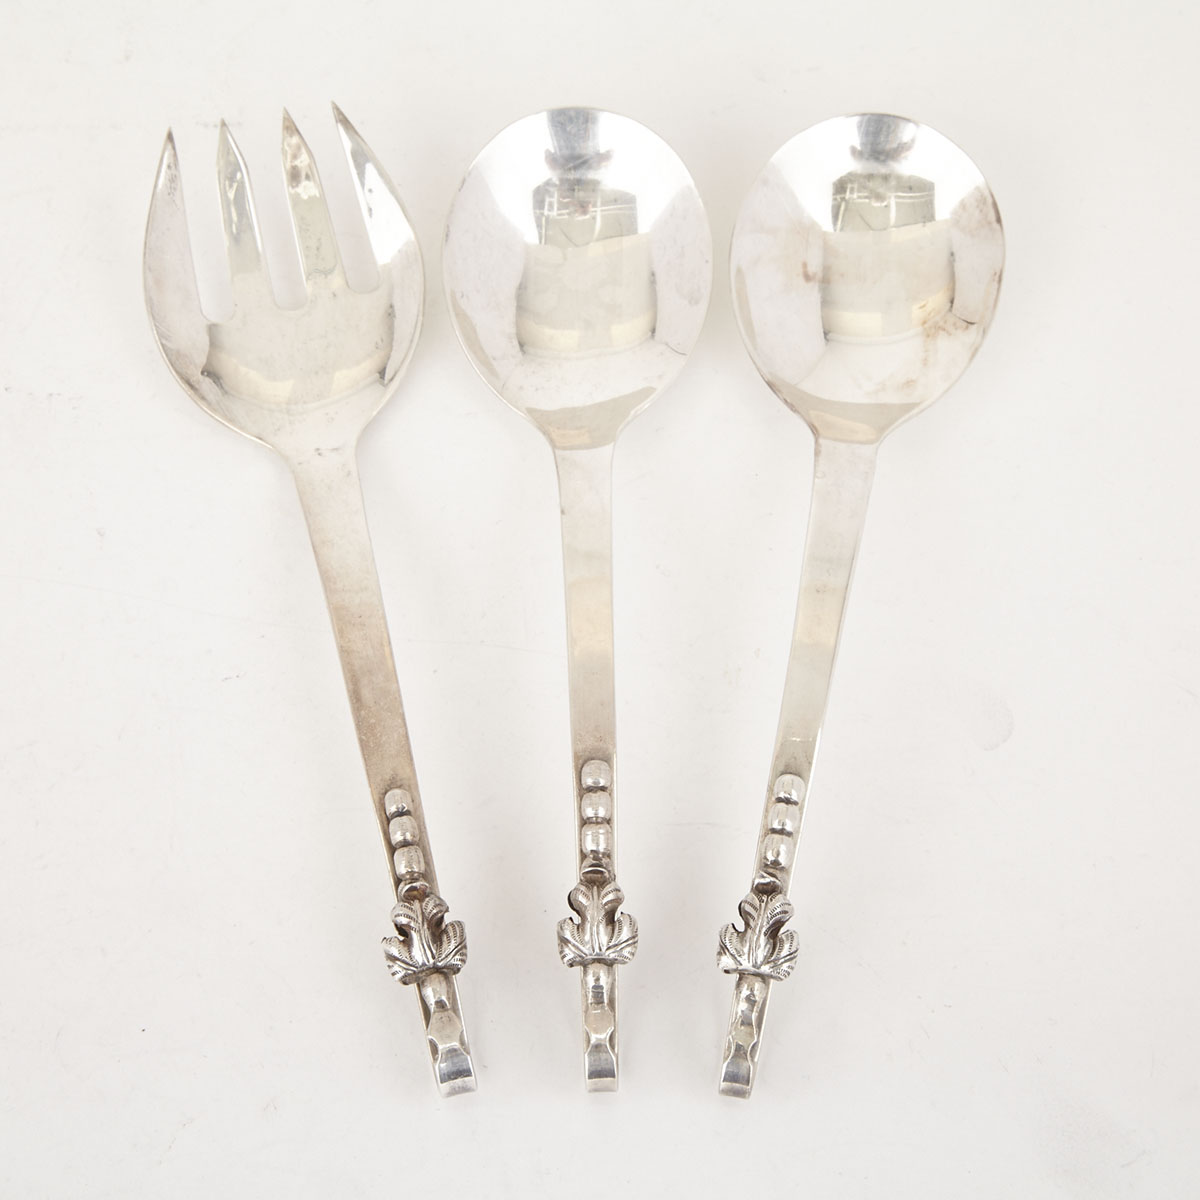 Pair of Mexican Silver Serving Spoons and Serving Fork, F. Ramirez, 20th century